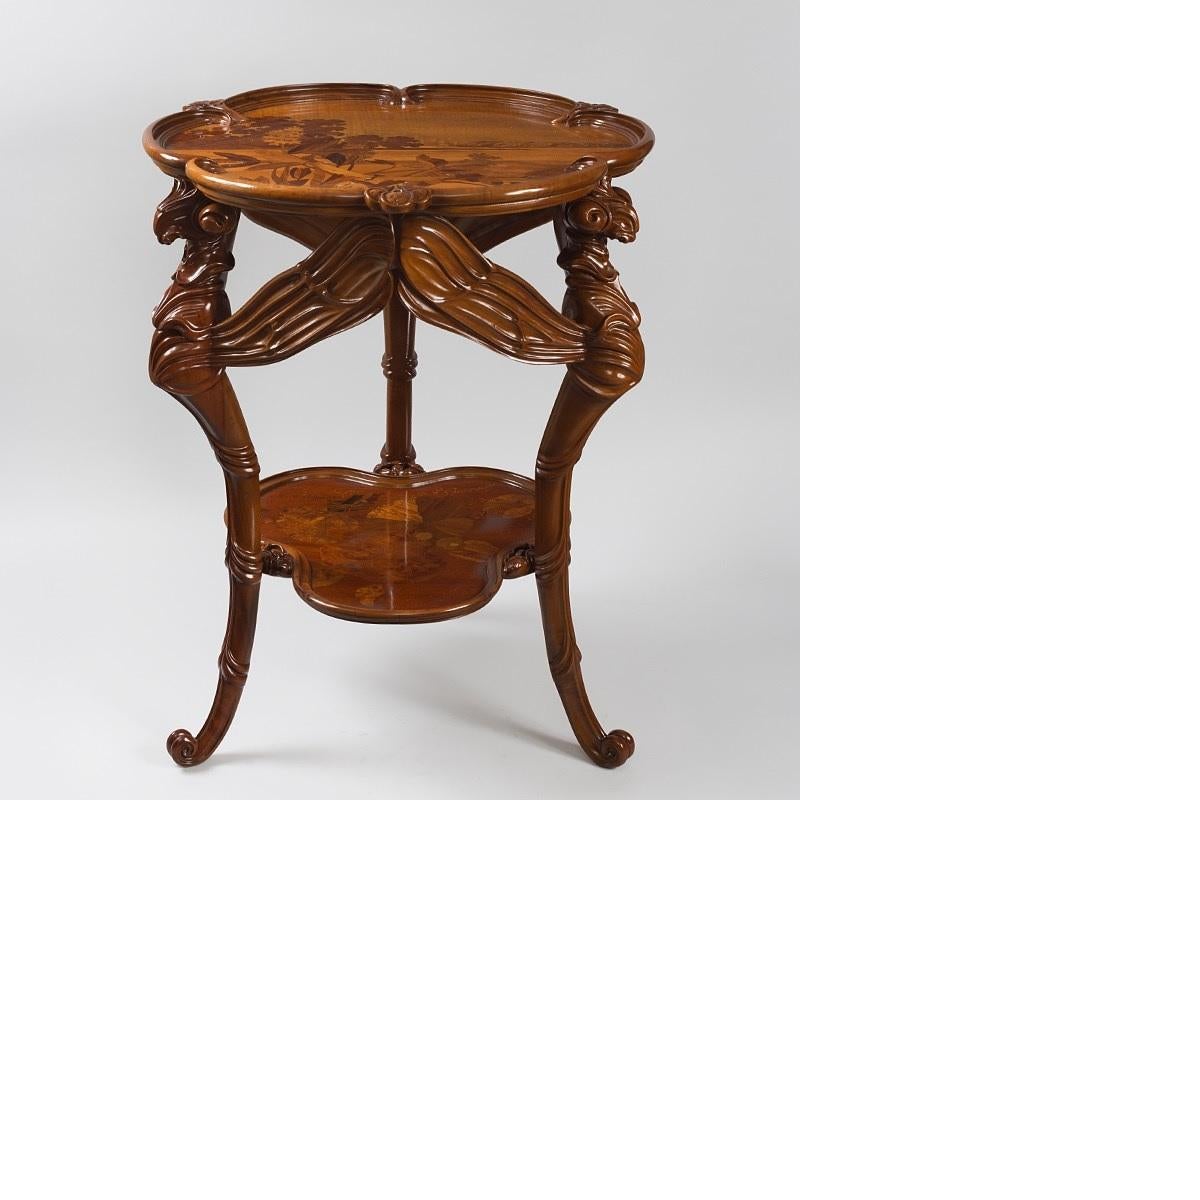 A French Art Nouveau “libellules” two tiered, three legged table with carved and marquetry decoration by Emile Gallé. Each of the three legs of the table is in the form of a dragonfly with extended wings. Each tier of the table is decorated with